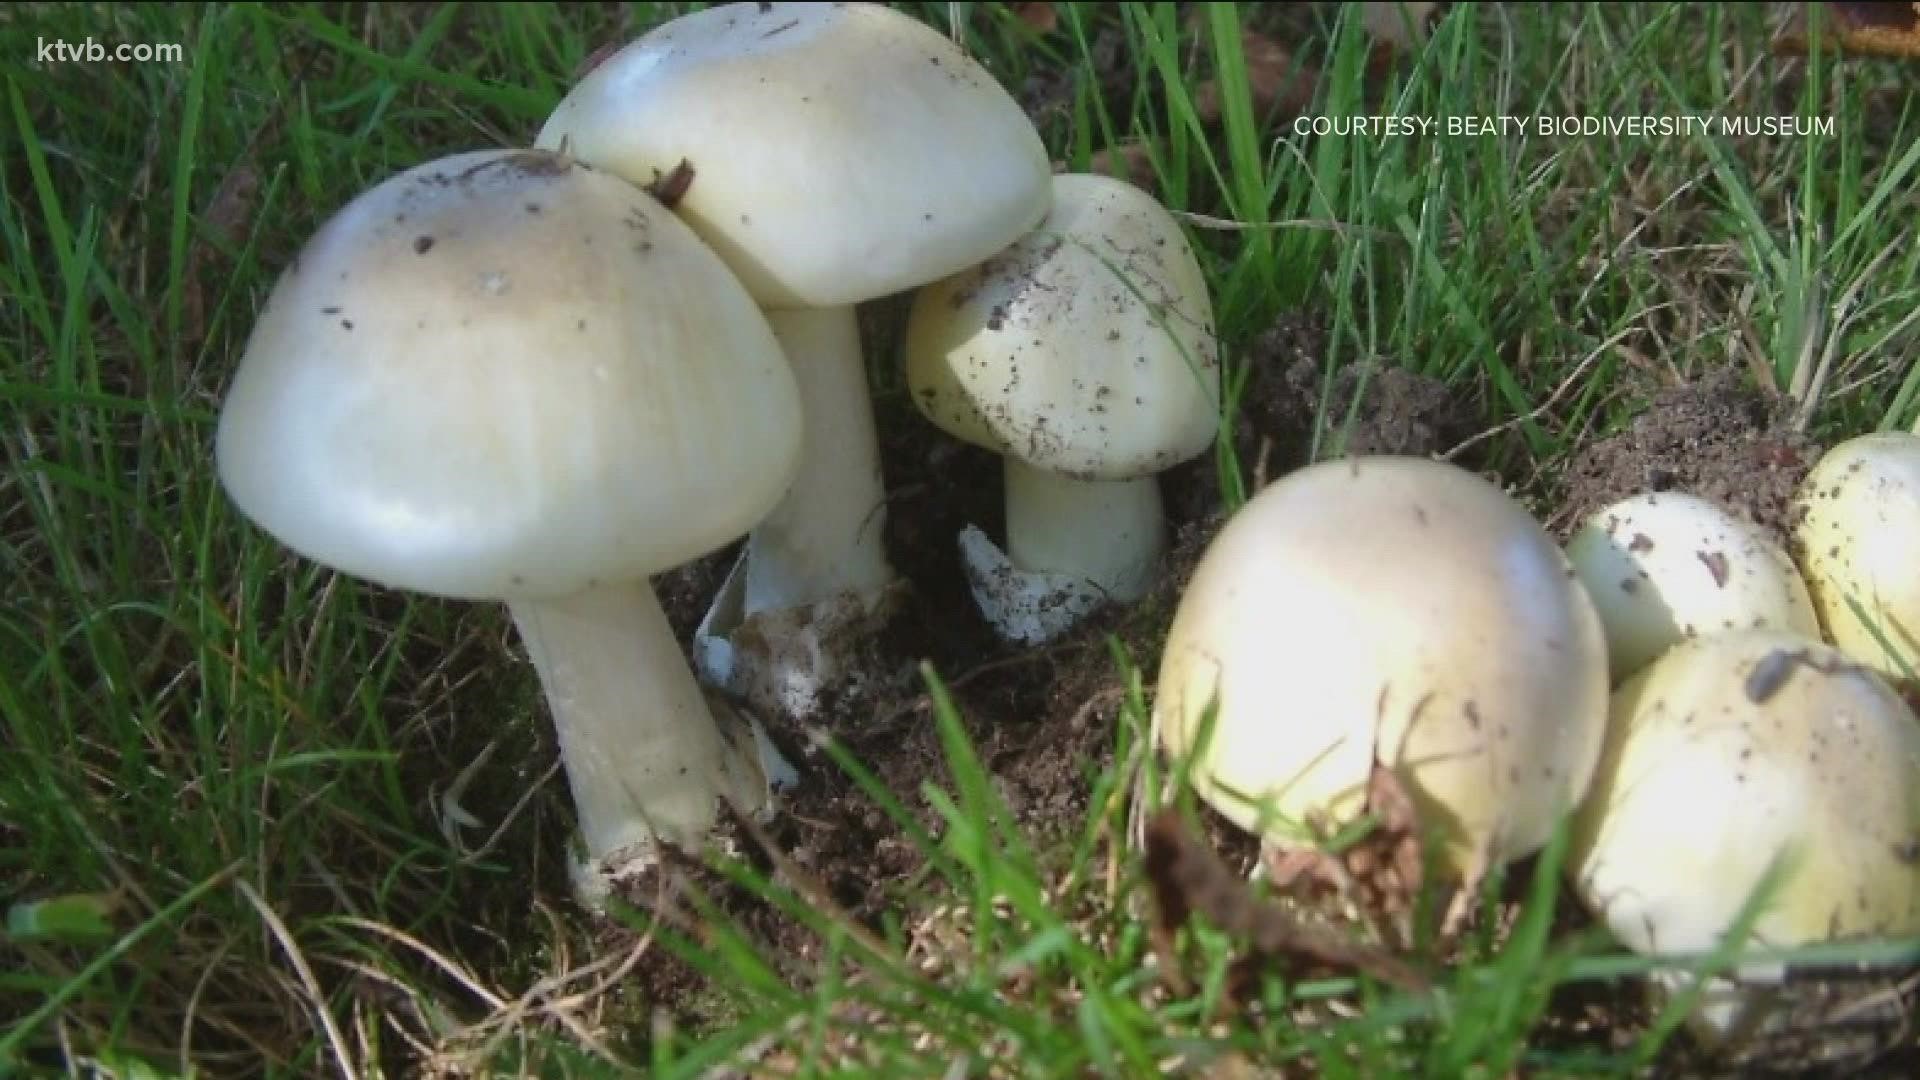 The mushroom, known as "Death Cap," was found in the North End. Idaho Health and Welfare said it may be present elsewhere in Idaho.